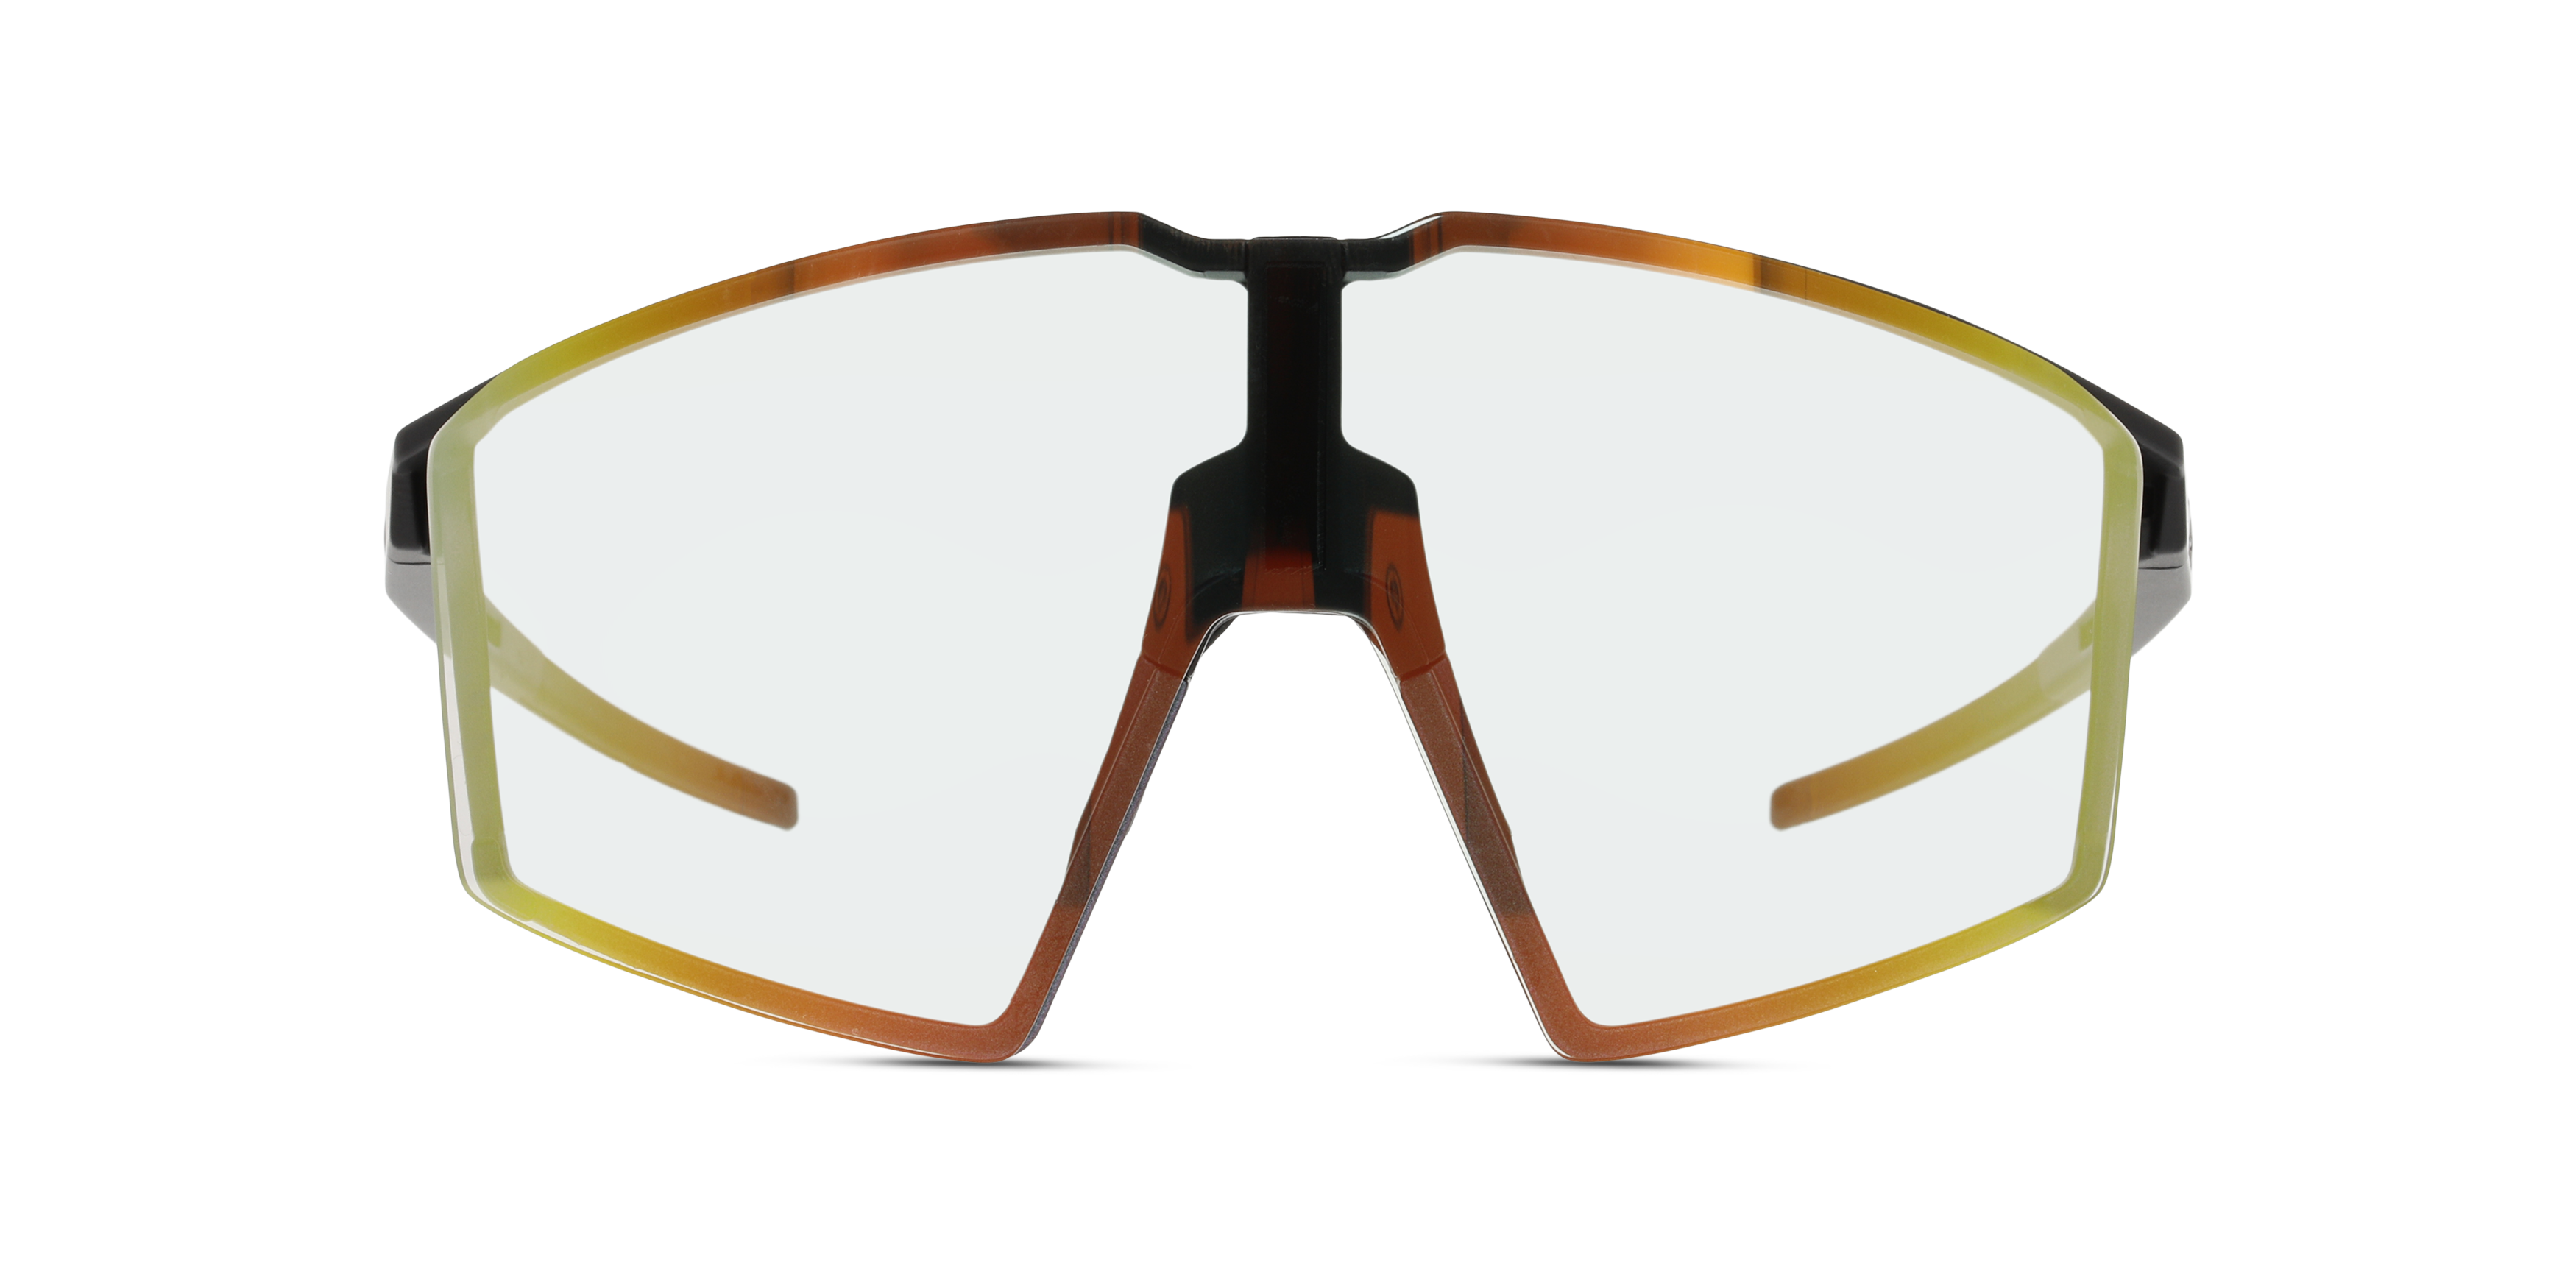 [products.image.front] Julbo J562 3380